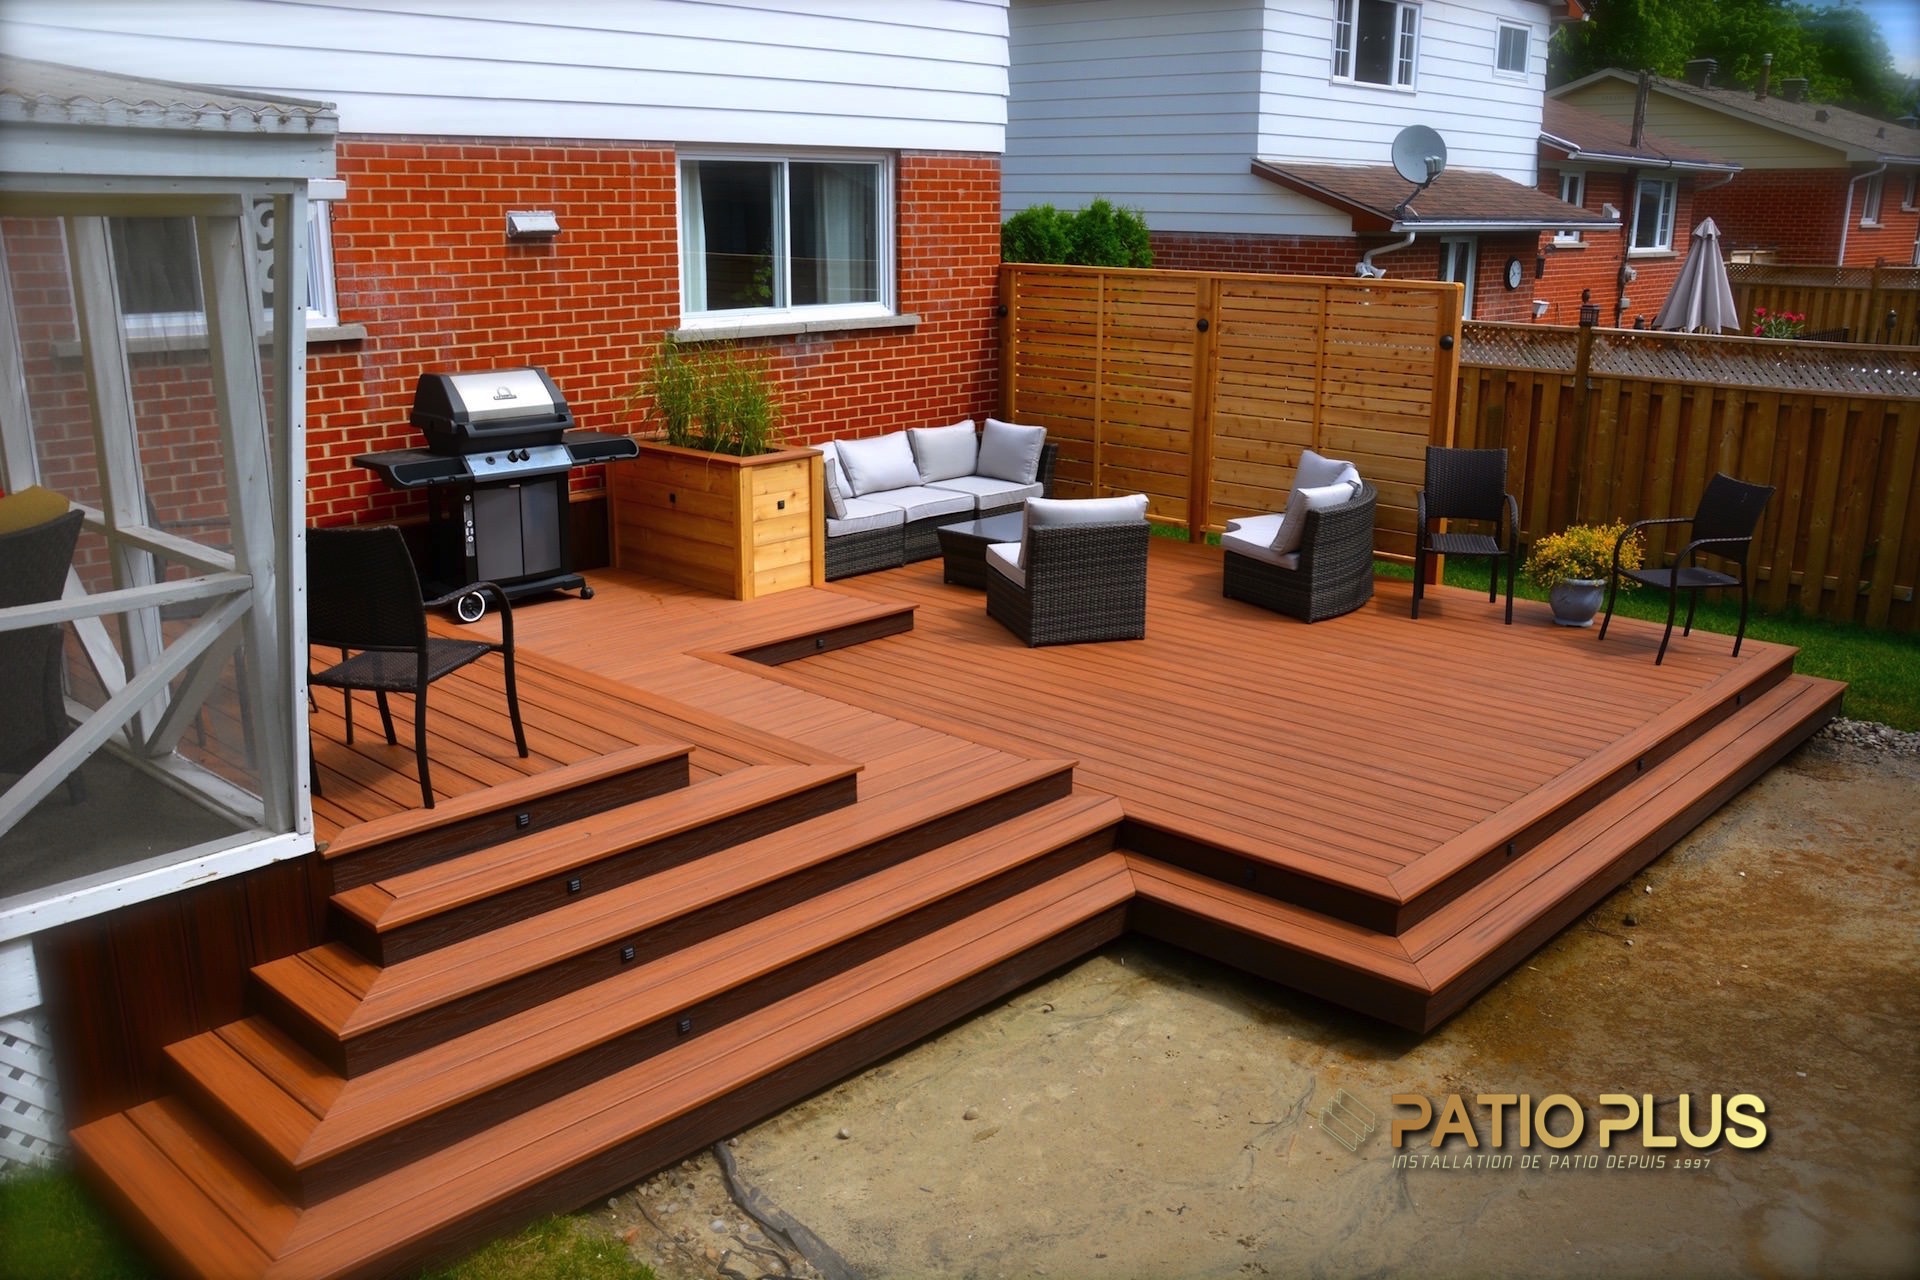 Category of multi-level patio & deck